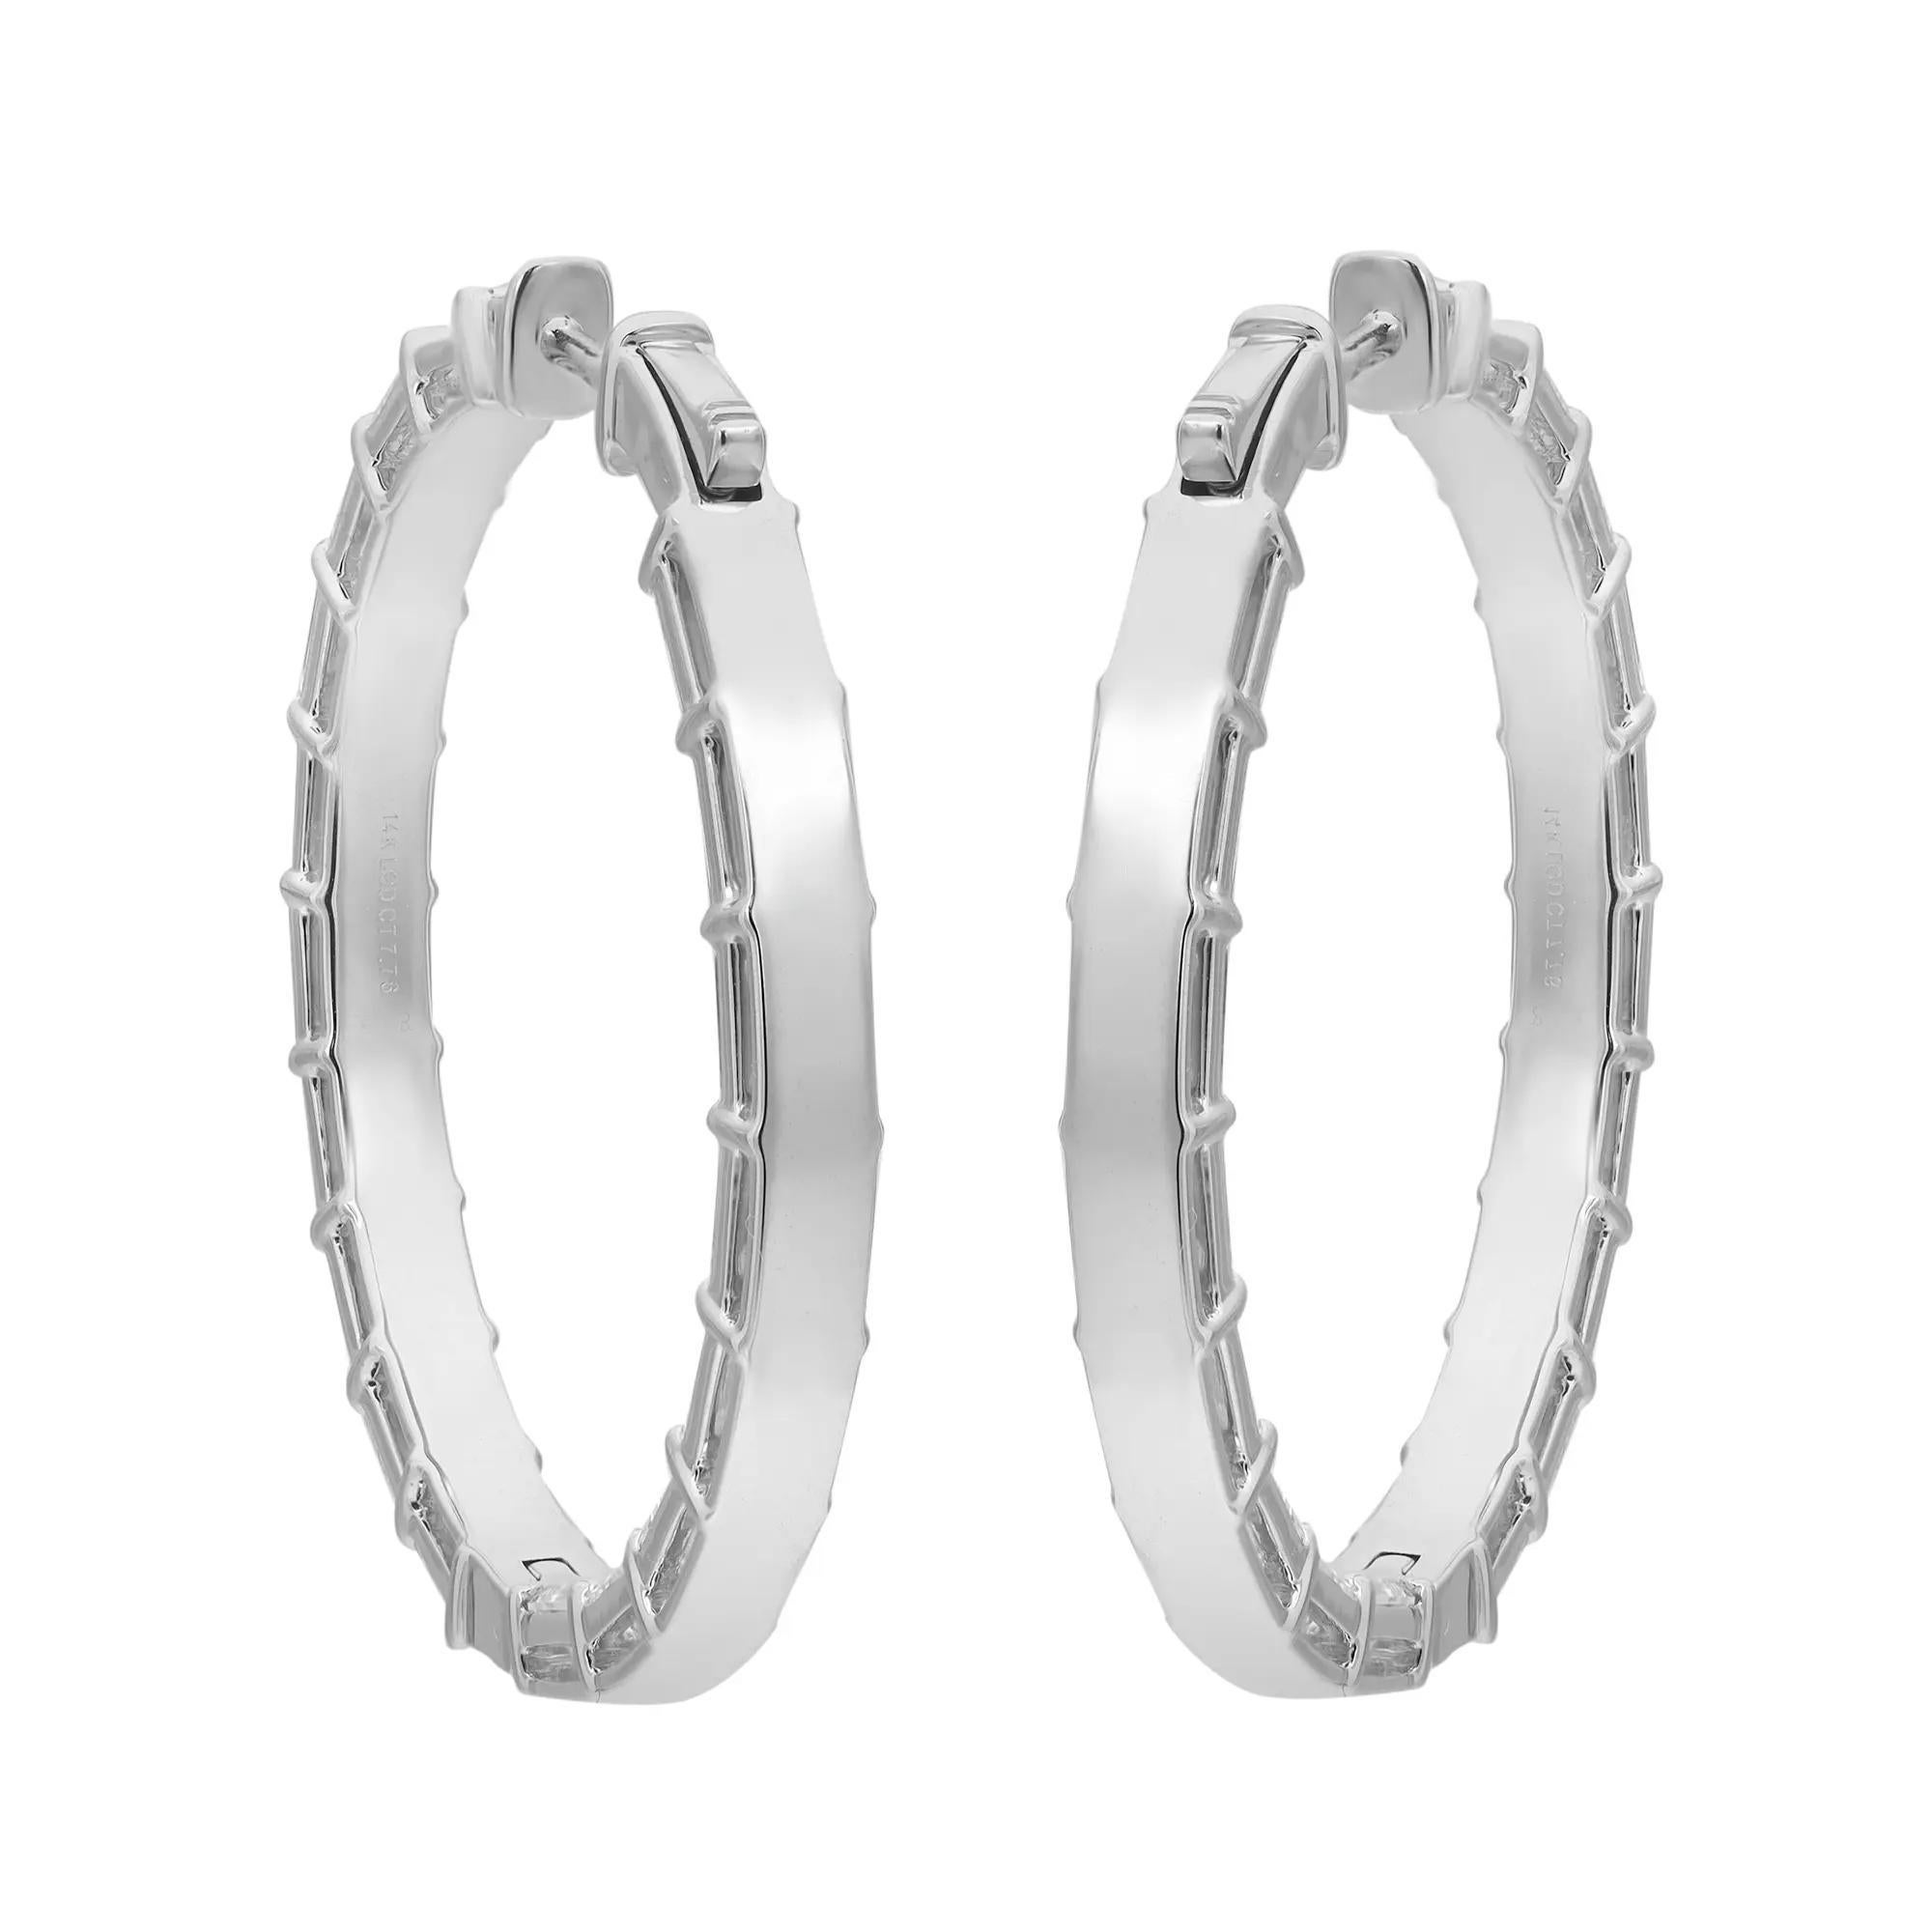 Beautiful and elegant lab grown diamond inside out hoop earrings feature 36 prong-set emerald cut lab grown diamonds in a single line. The diamonds embellish these earrings on the inside and the outside, offering a dazzling look from every angle.